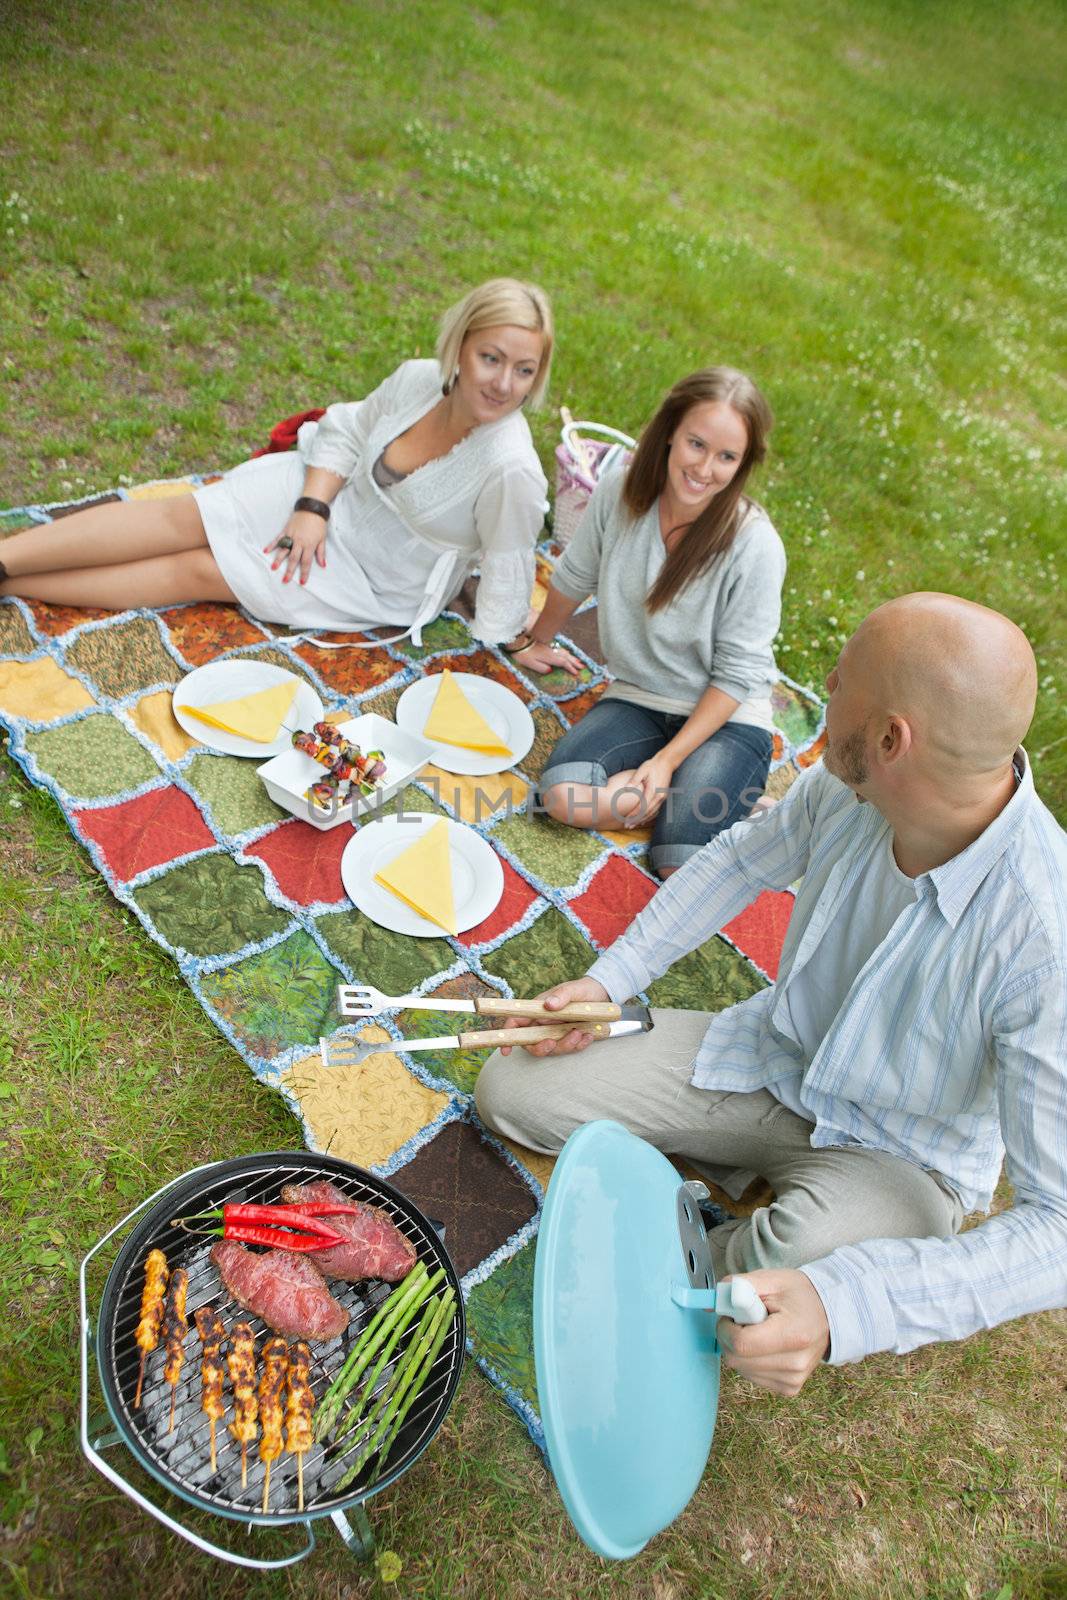 High angle view of man cooking meat on portable barbeque while looking at friends